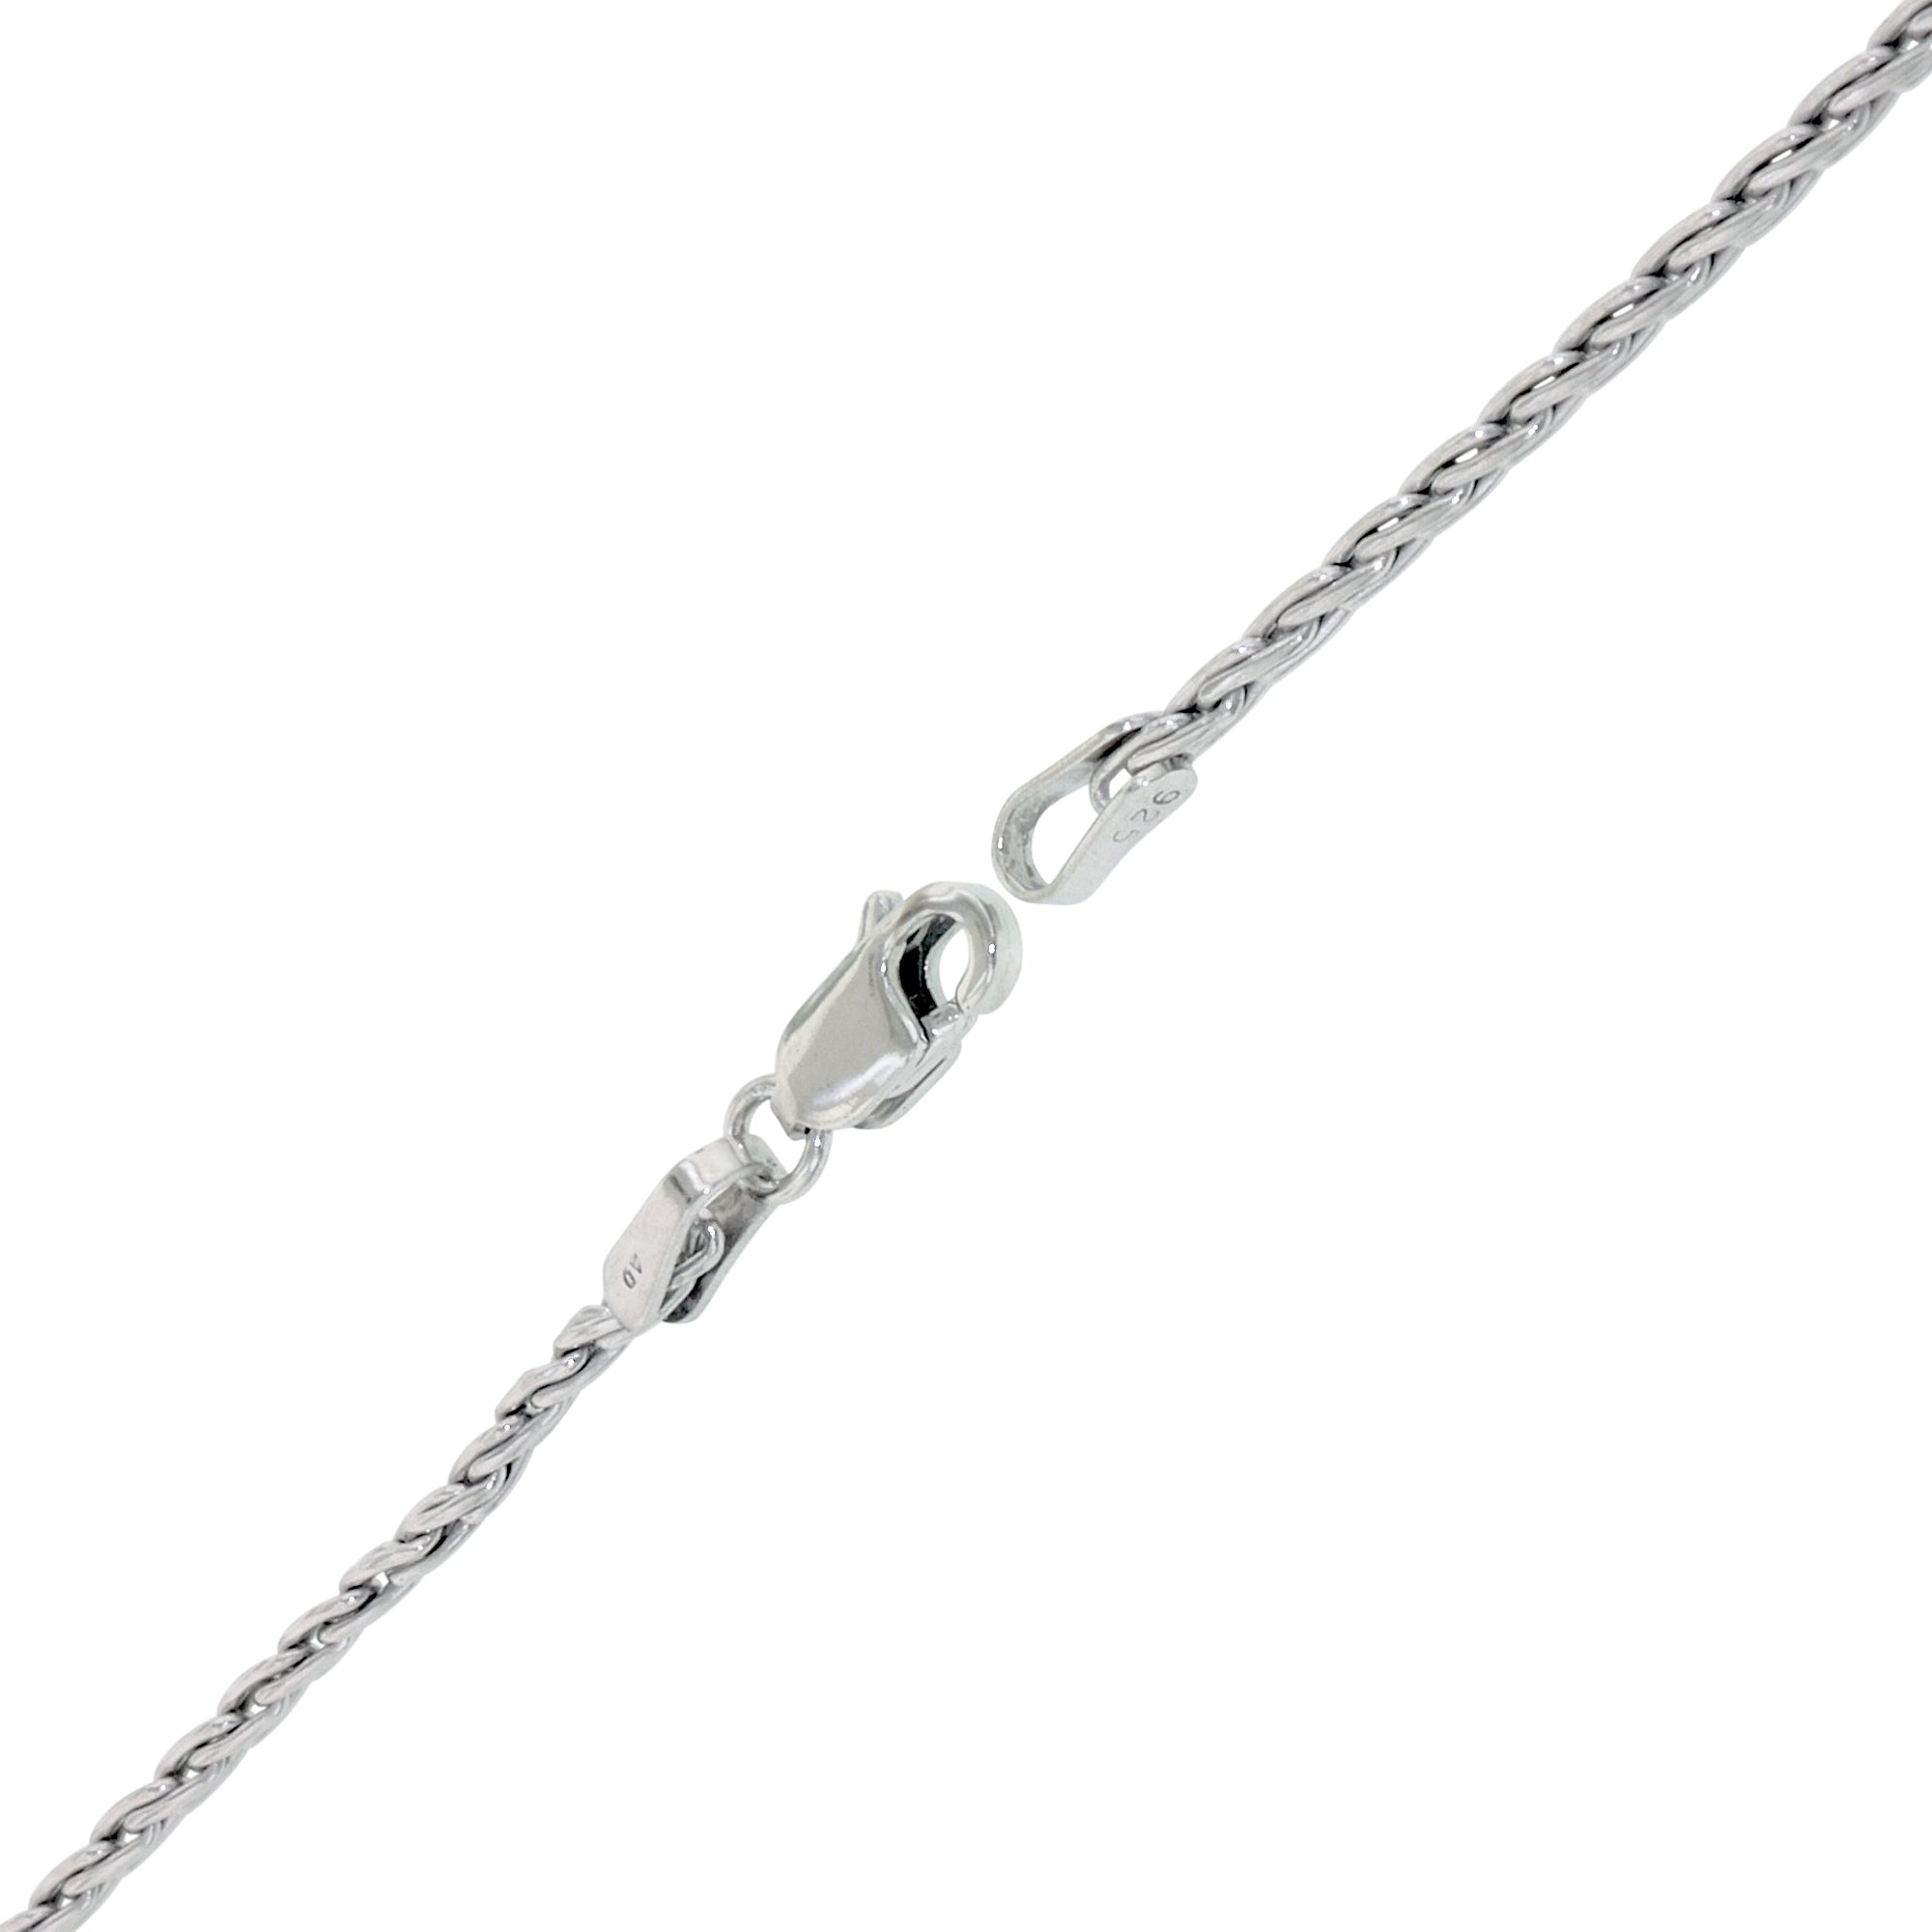 Parisian Wheat Chain in Sterling Silver (24 inches and 1.5mm wide)